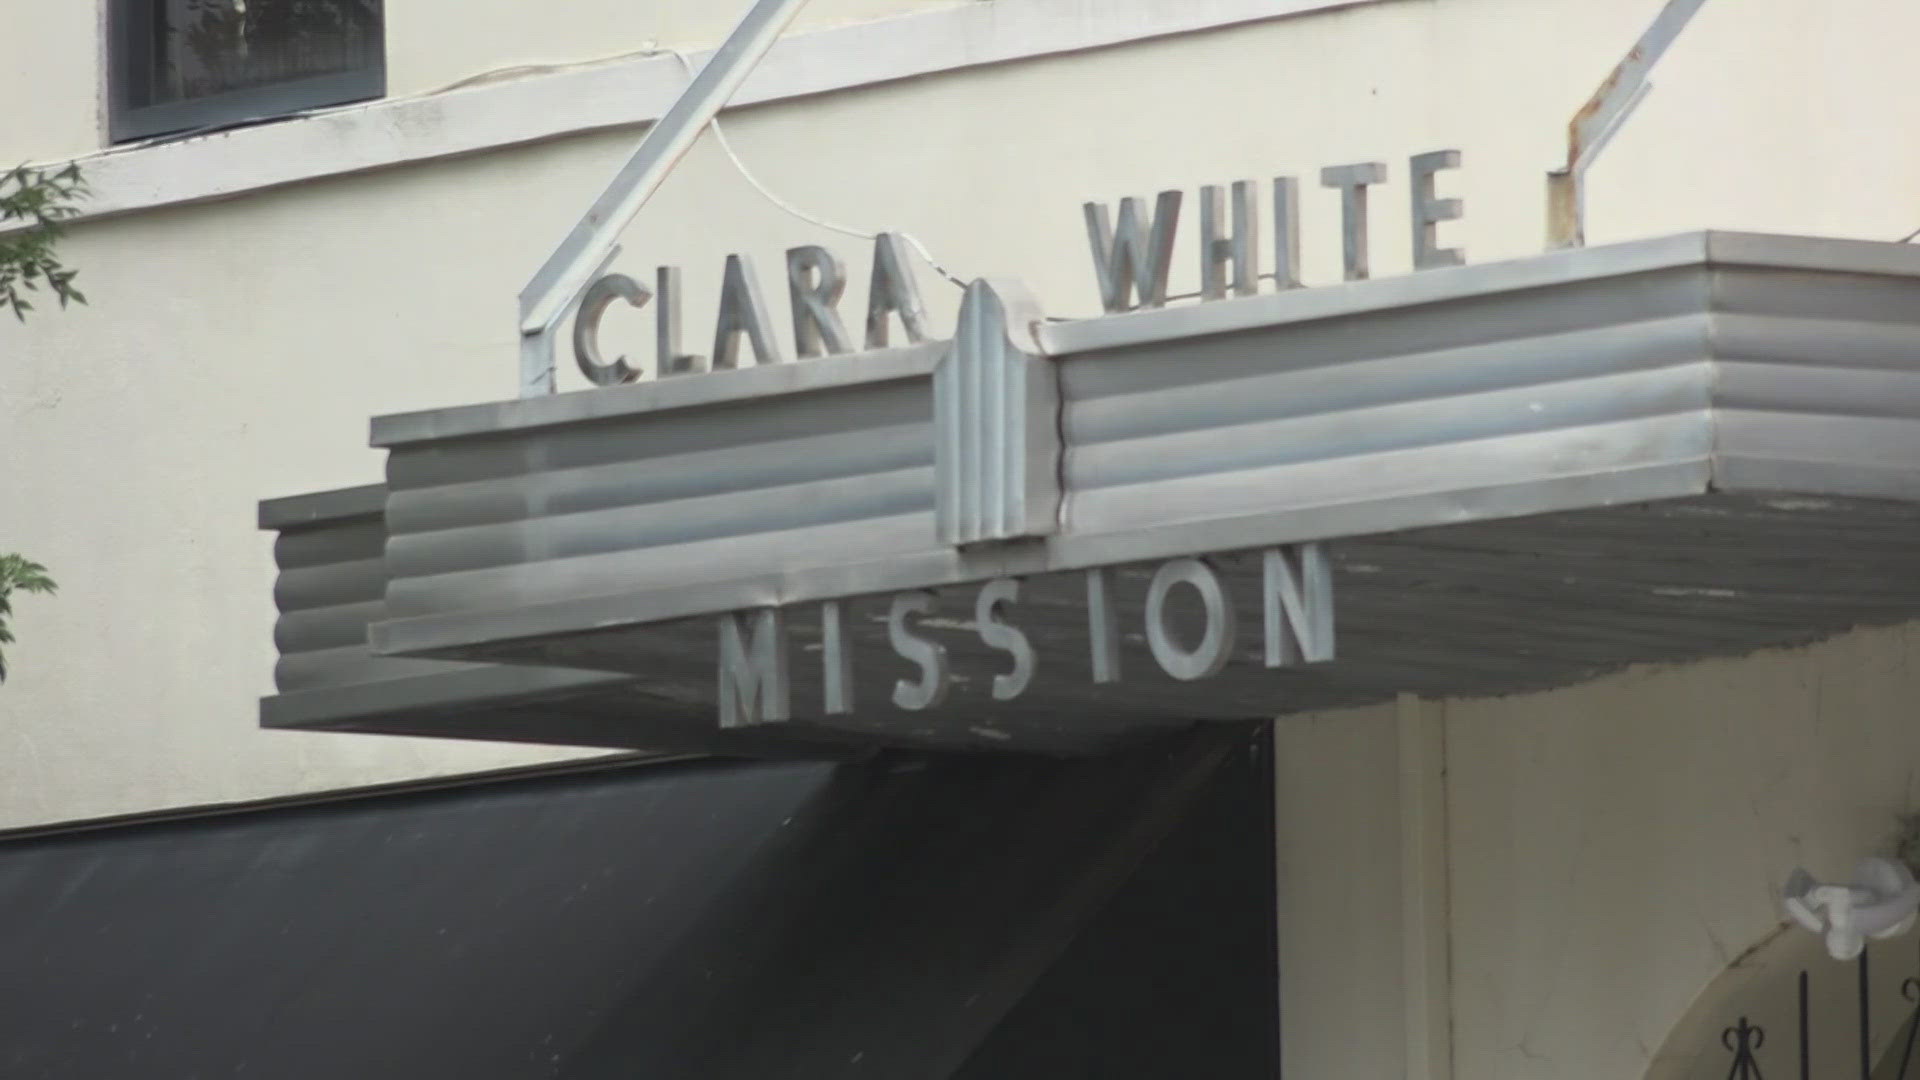 A new report from the inspector general found “significant deficiencies” in oversight of the way Clara White Mission is using grant funding.